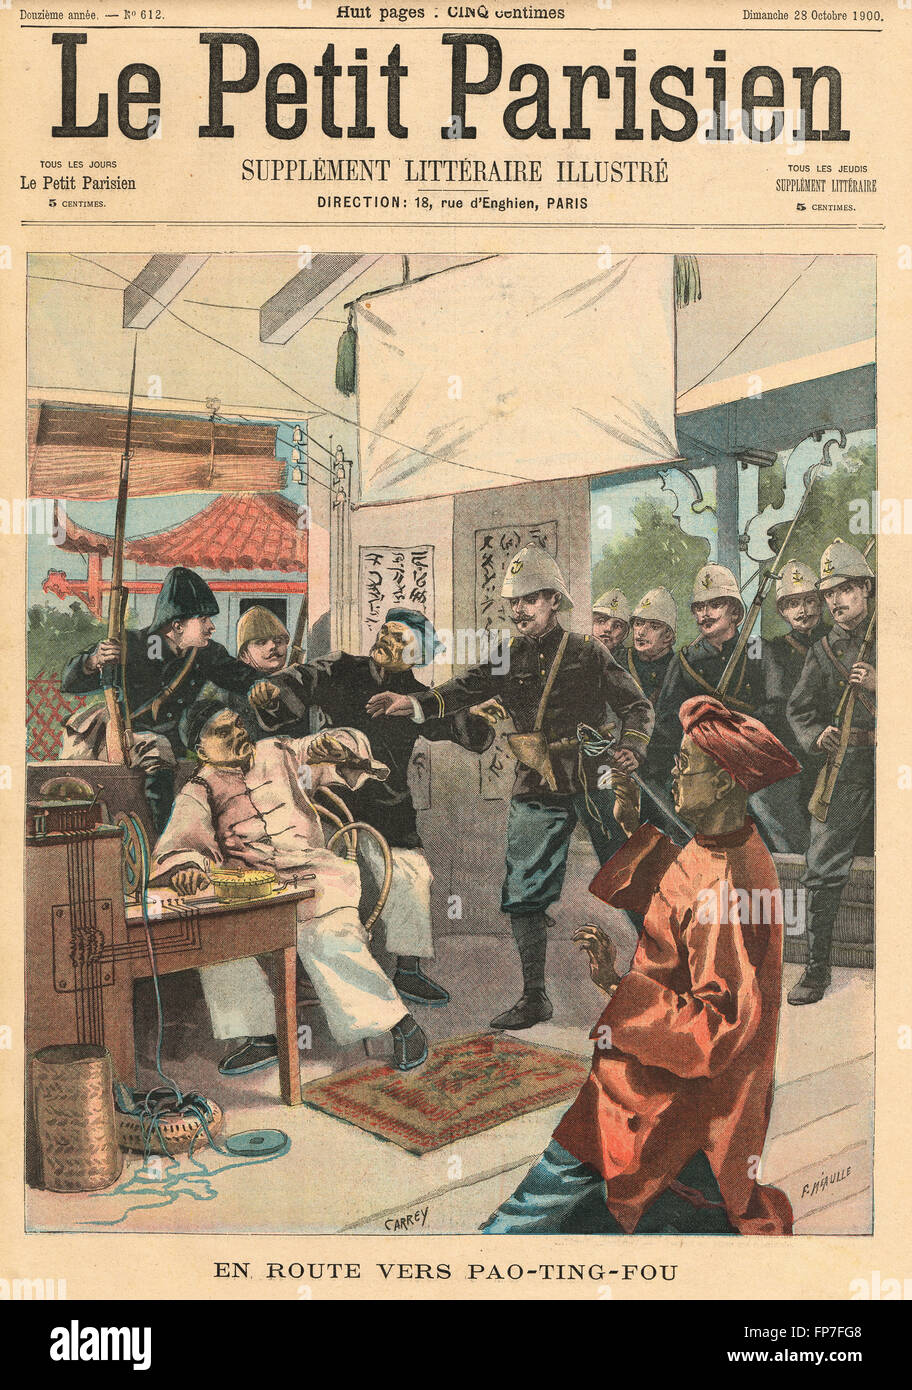 Allied soldiers capturing a telegraph post en route to Pao-Ting-Fou City  Boxer Rebellion China 1900. French illustrated newspaper Le Petit Parisien illustration Stock Photo